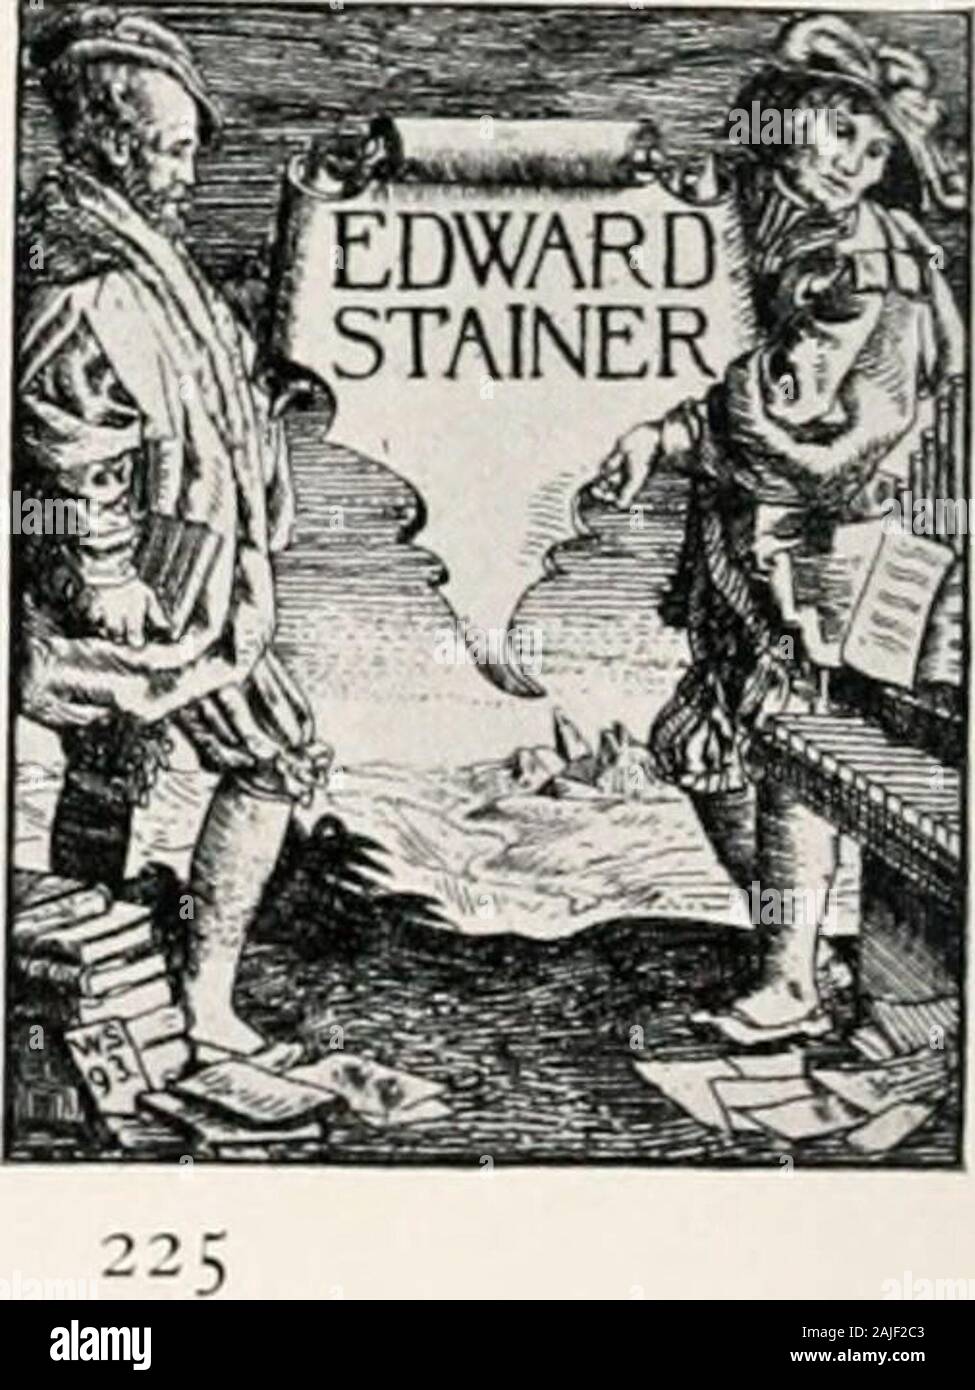 William Strang; catalogue of his etched work . 224 CATALOGUE OF ETCHINGS 223. The Stone Cutters1894. Etching, 6 in. x 9 in.Number of Proofs, 30. 224. Portrait of W. Strang. 1894. Etching, 10 in. X 6 in.Number of Proofs, 50. 225. Book Plate 1894. Etching, 4 in. X 3 in.Number of Proofs, 6. 93 CATALOGUE OF ETCHINGS 226. Anarchy 1894. Engraving, 9^ in. x 16 in.Number of Proofs, 75. 227. Portrait of Thomas Hardy, No. 21894. Etching, 9 in. X 6 in.Number of Proofs, 45. 228. The Mountain Nymph1894. Engraving on Zinc, 8 in. x 5 in.Number of Proofs, 25. 94 Stock Photo